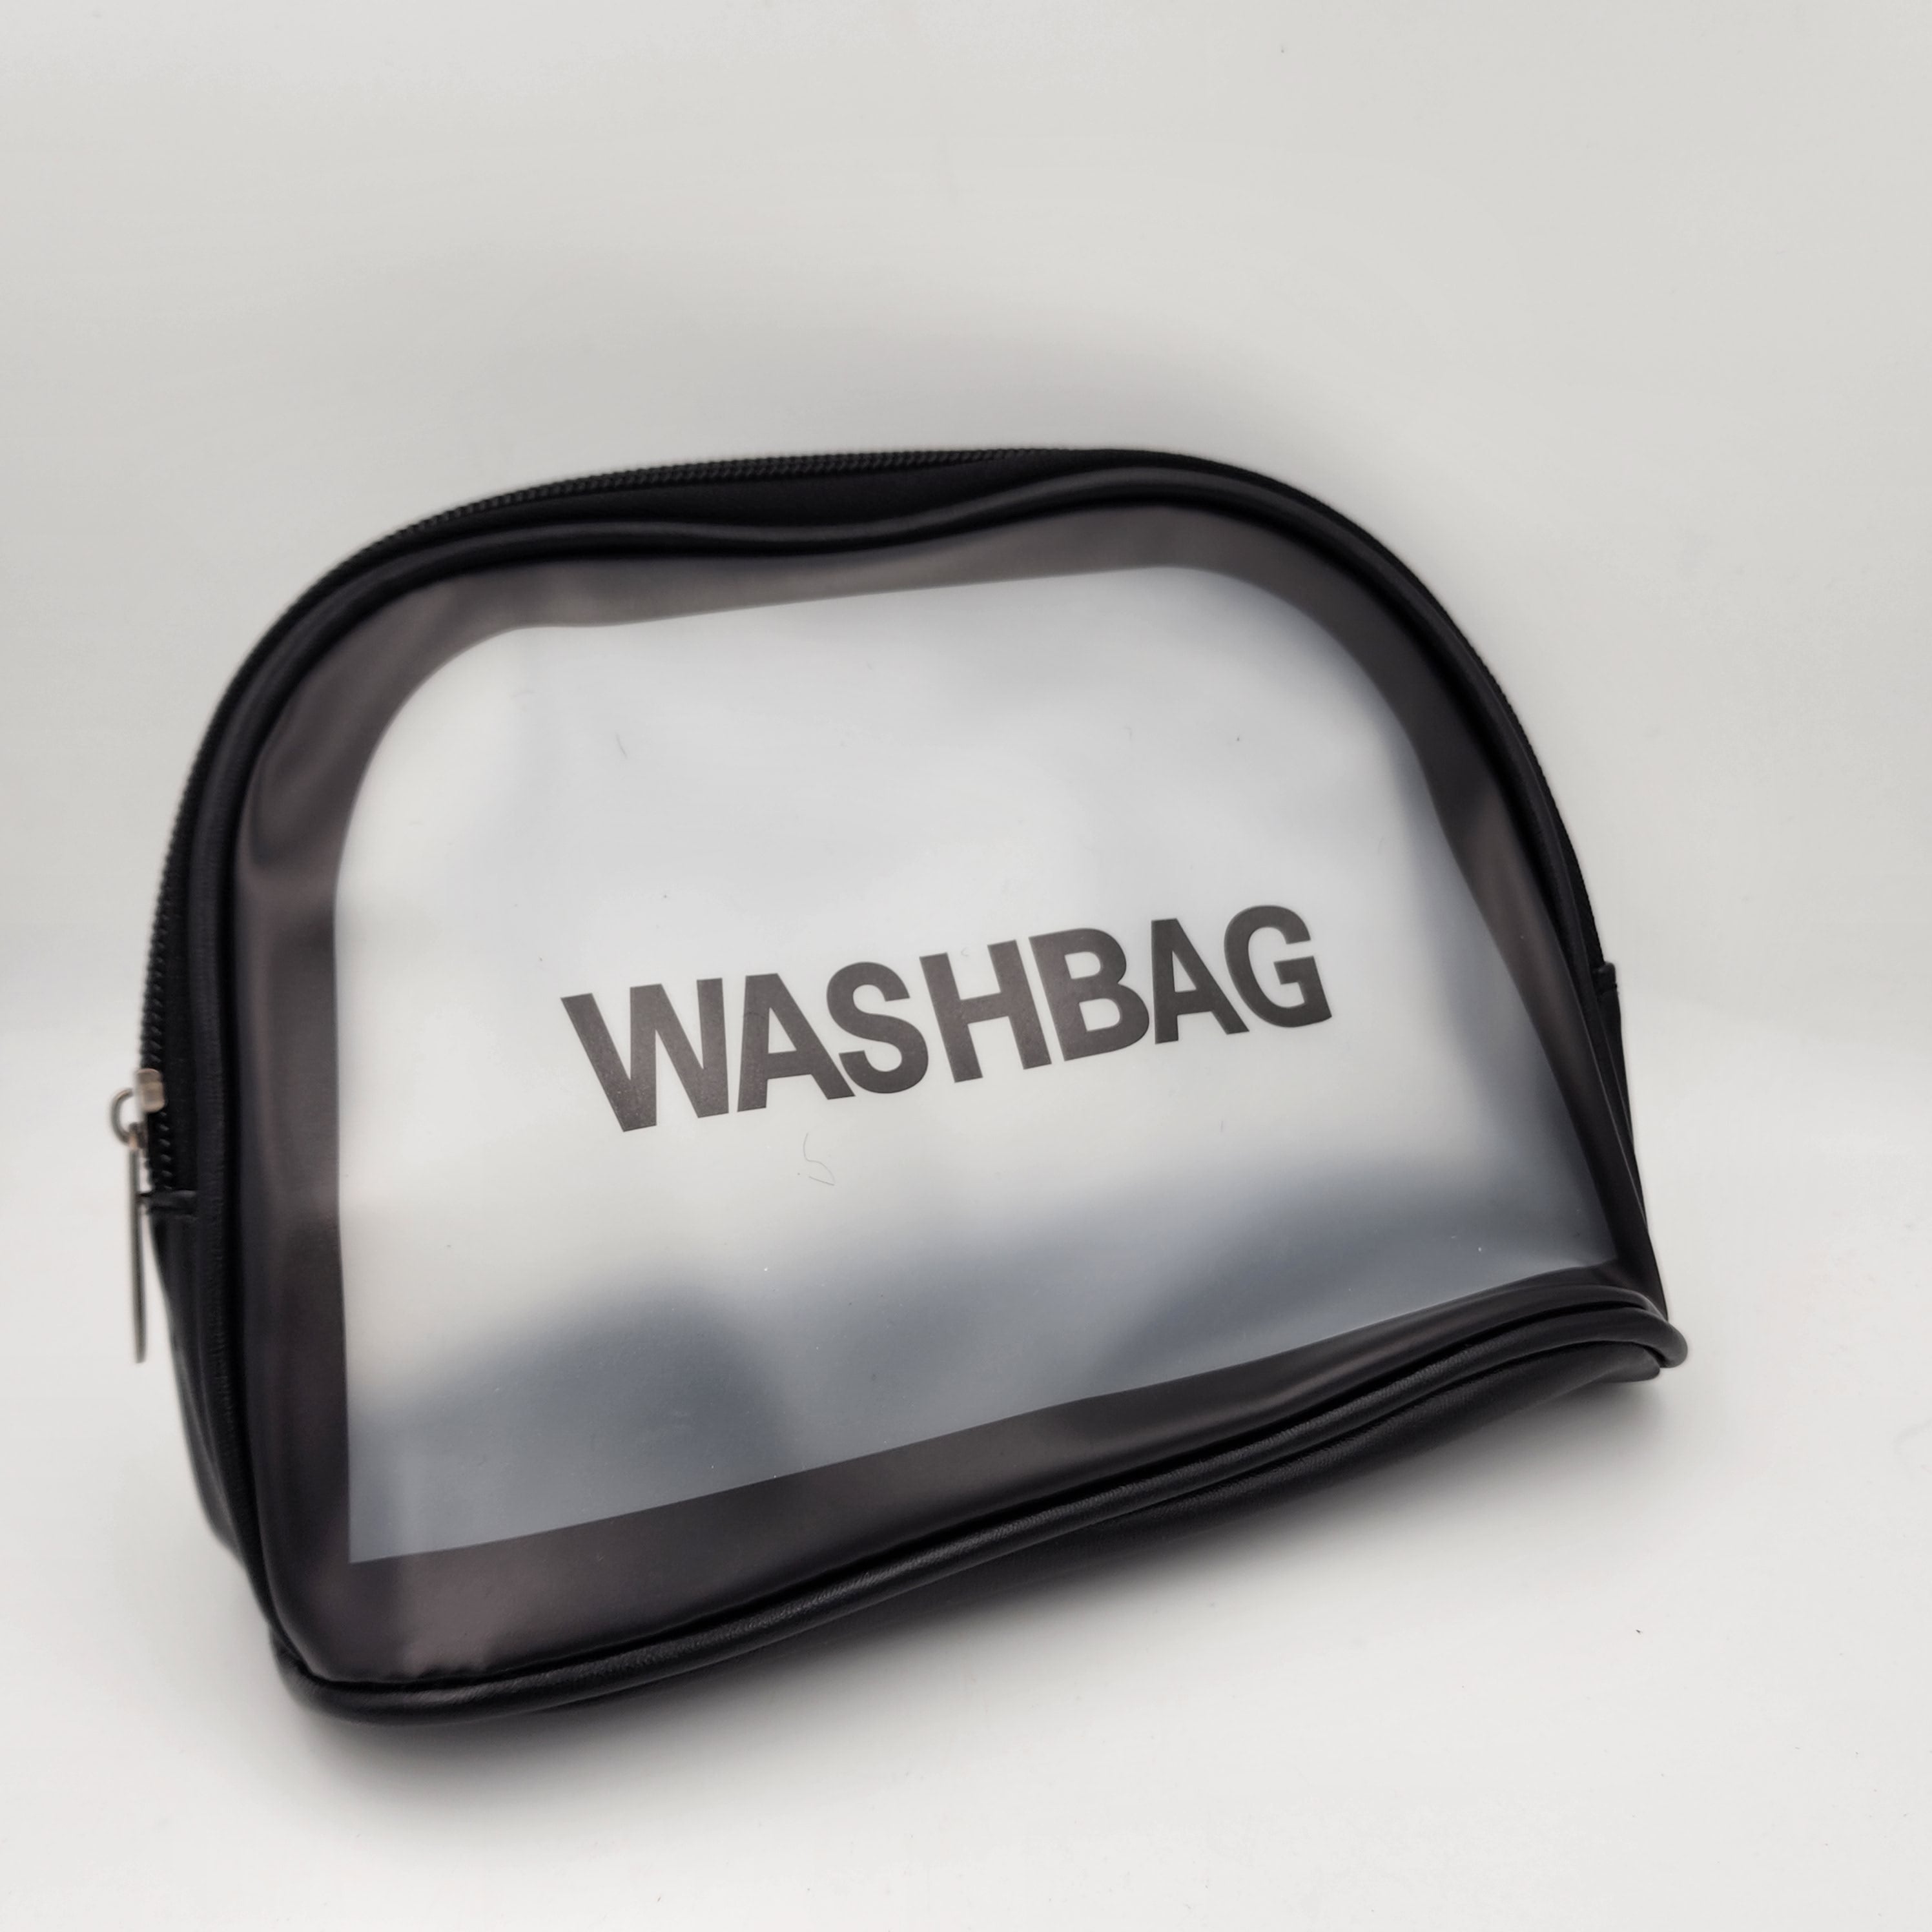 Black Washbag Small Makeup Pouch | Travel Pouch | Cosmetics Pouch | Makeup Kit Bag | 19*9*15 - Beautiful Washbag